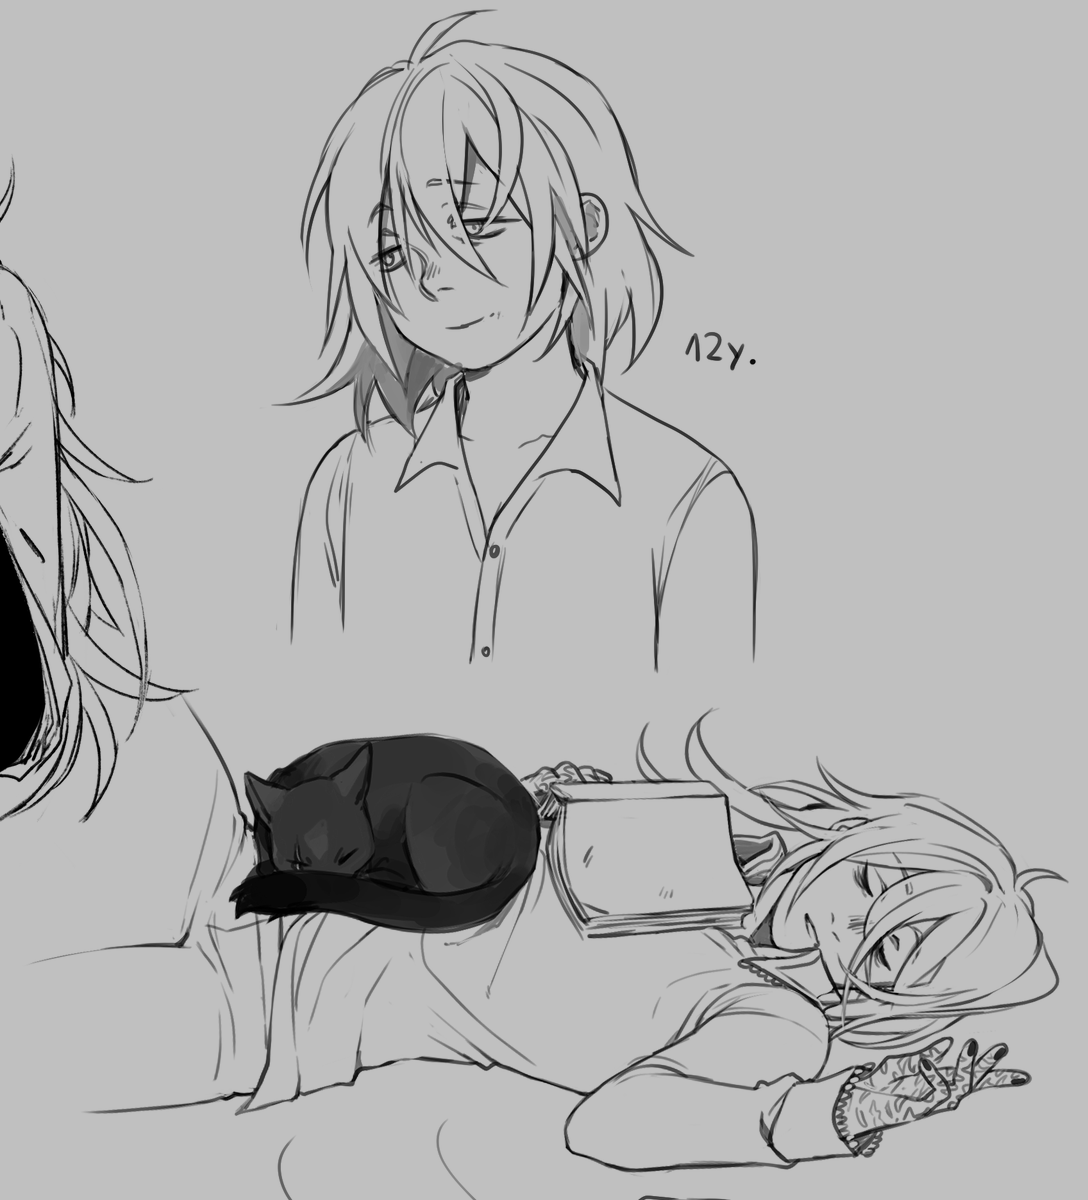 some archimedes sketches i didn't post yet
featuring their best friends (played by @/Lampii_Chai and @/AaronMcFocks) who take care of them uwu #dnd #ravnica 